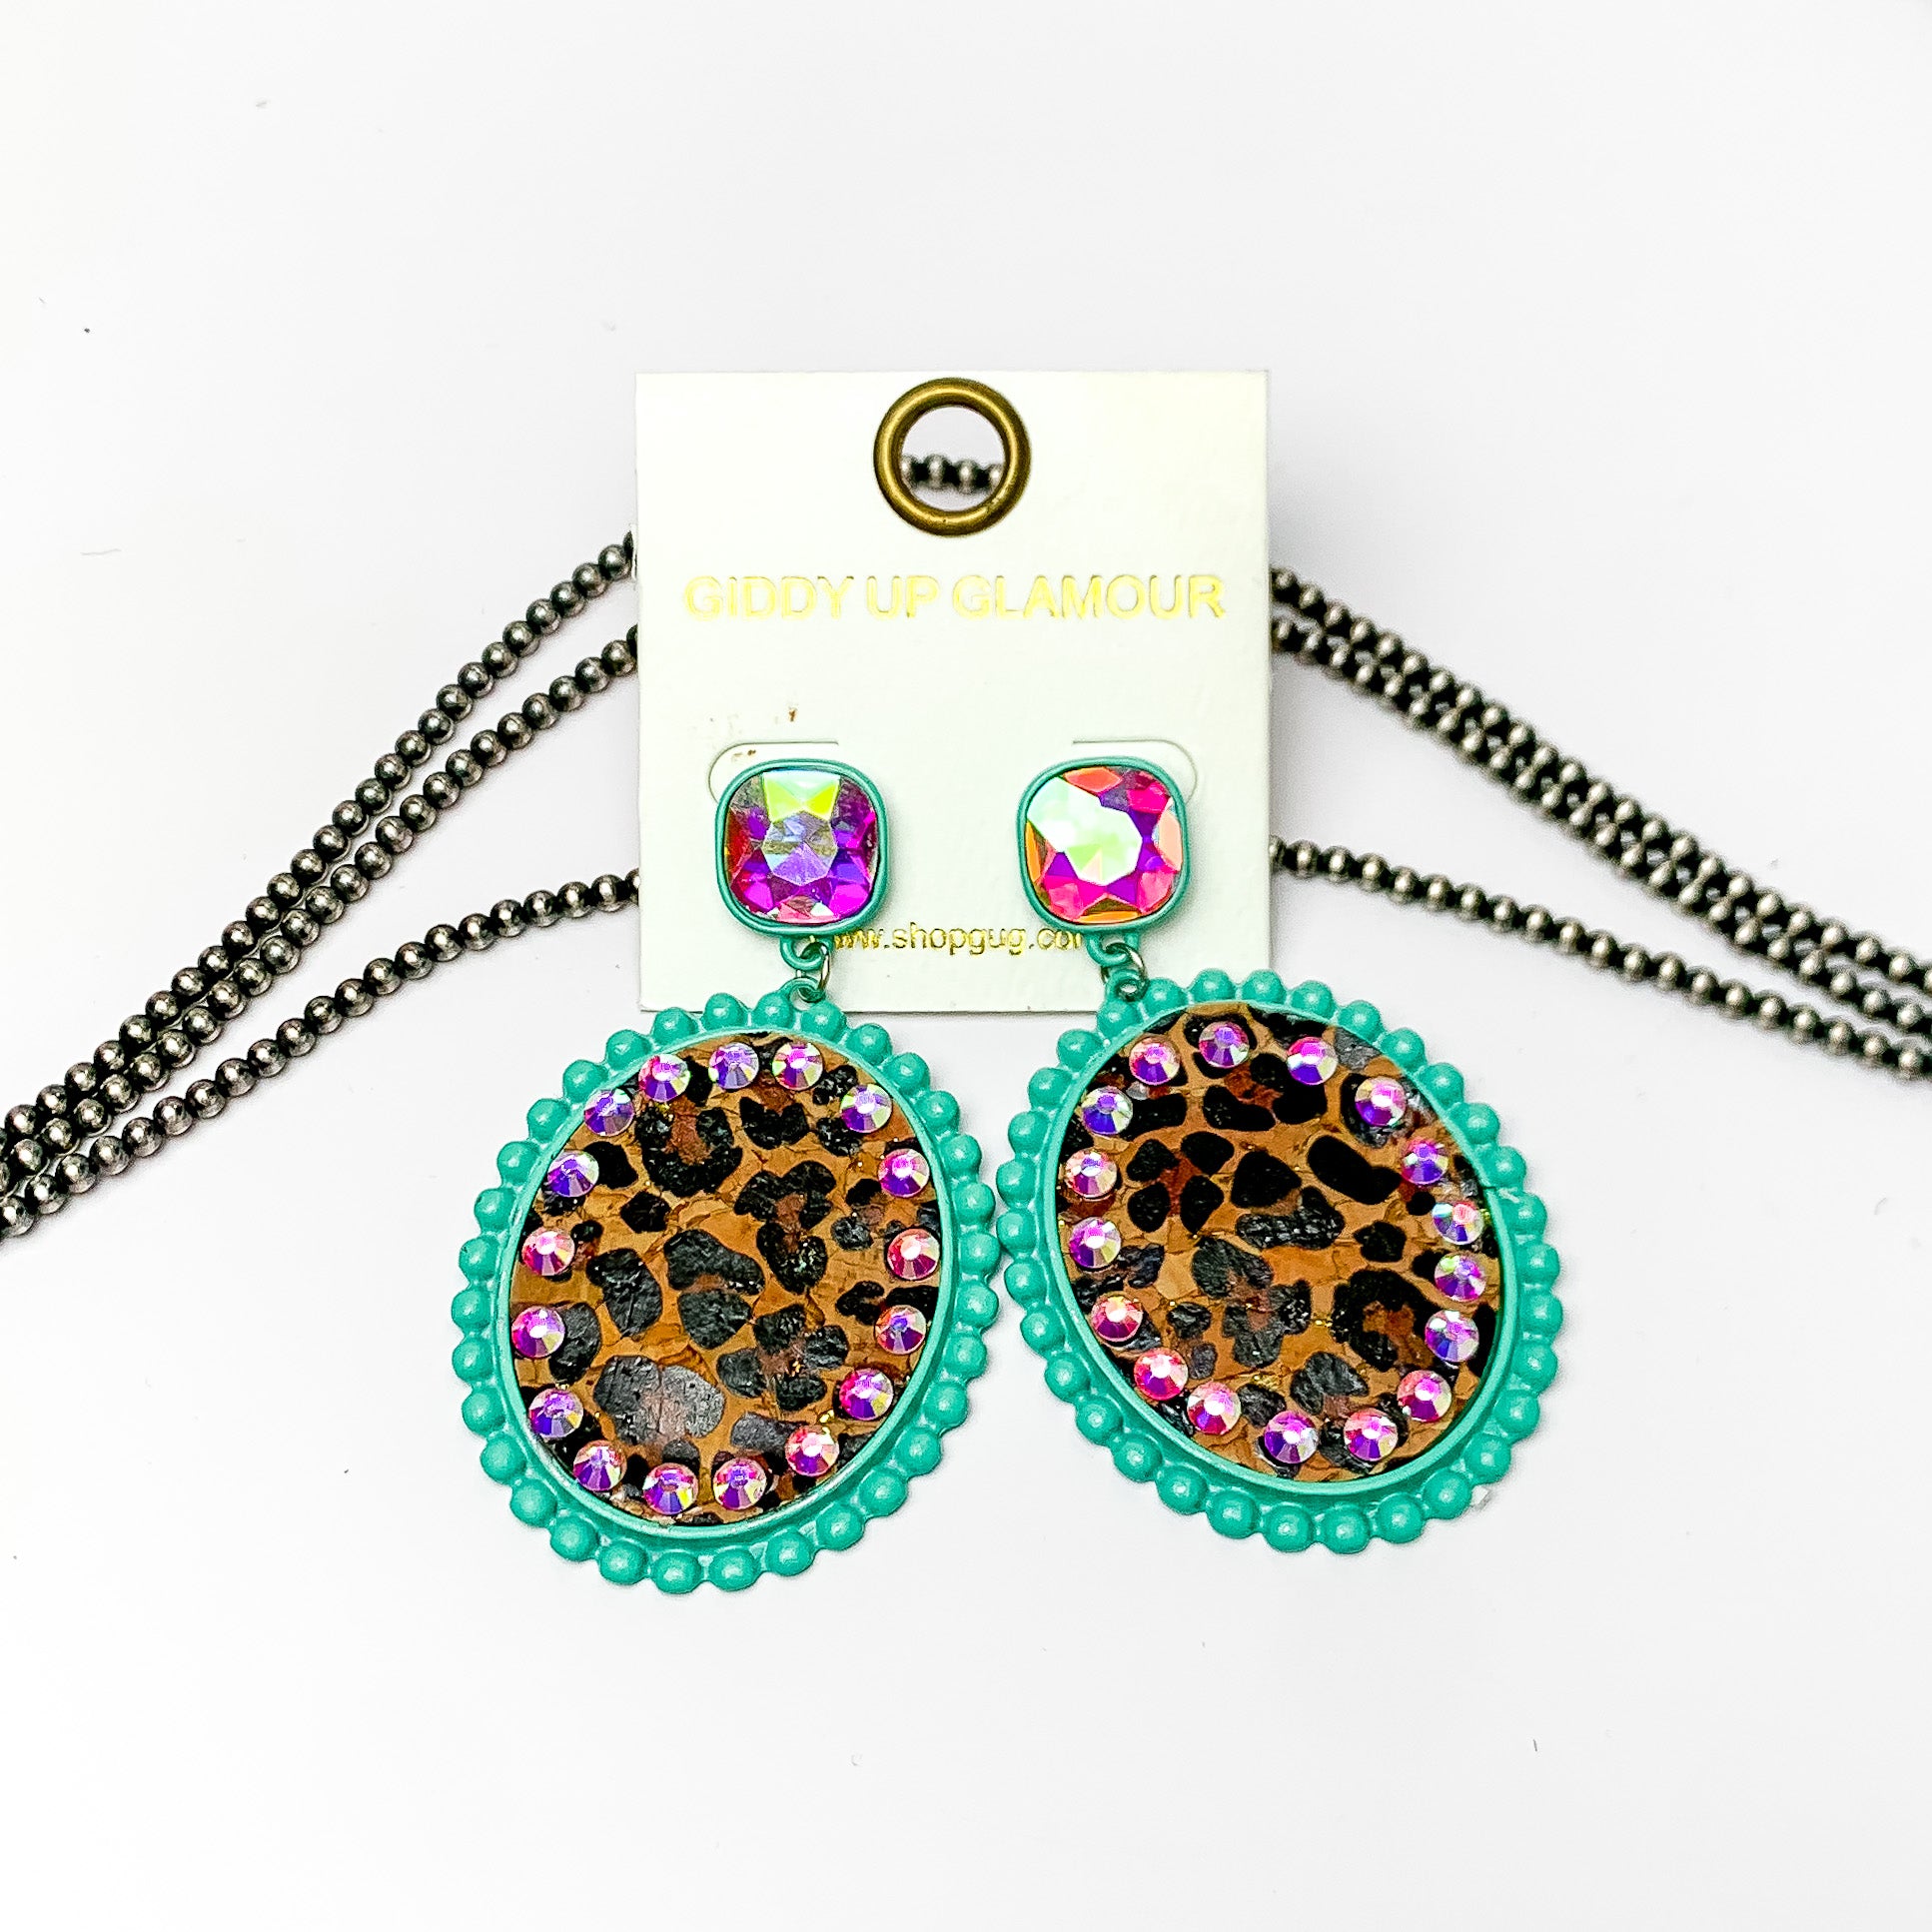 These earrings are oval shaped with leopard print inlay with the outline of the earing is turquoise but also has ab crystal going around the oval shape. These pair of earrings also have a ab crystal post style earring. Pictured on a white background with navajo pearls behind it.